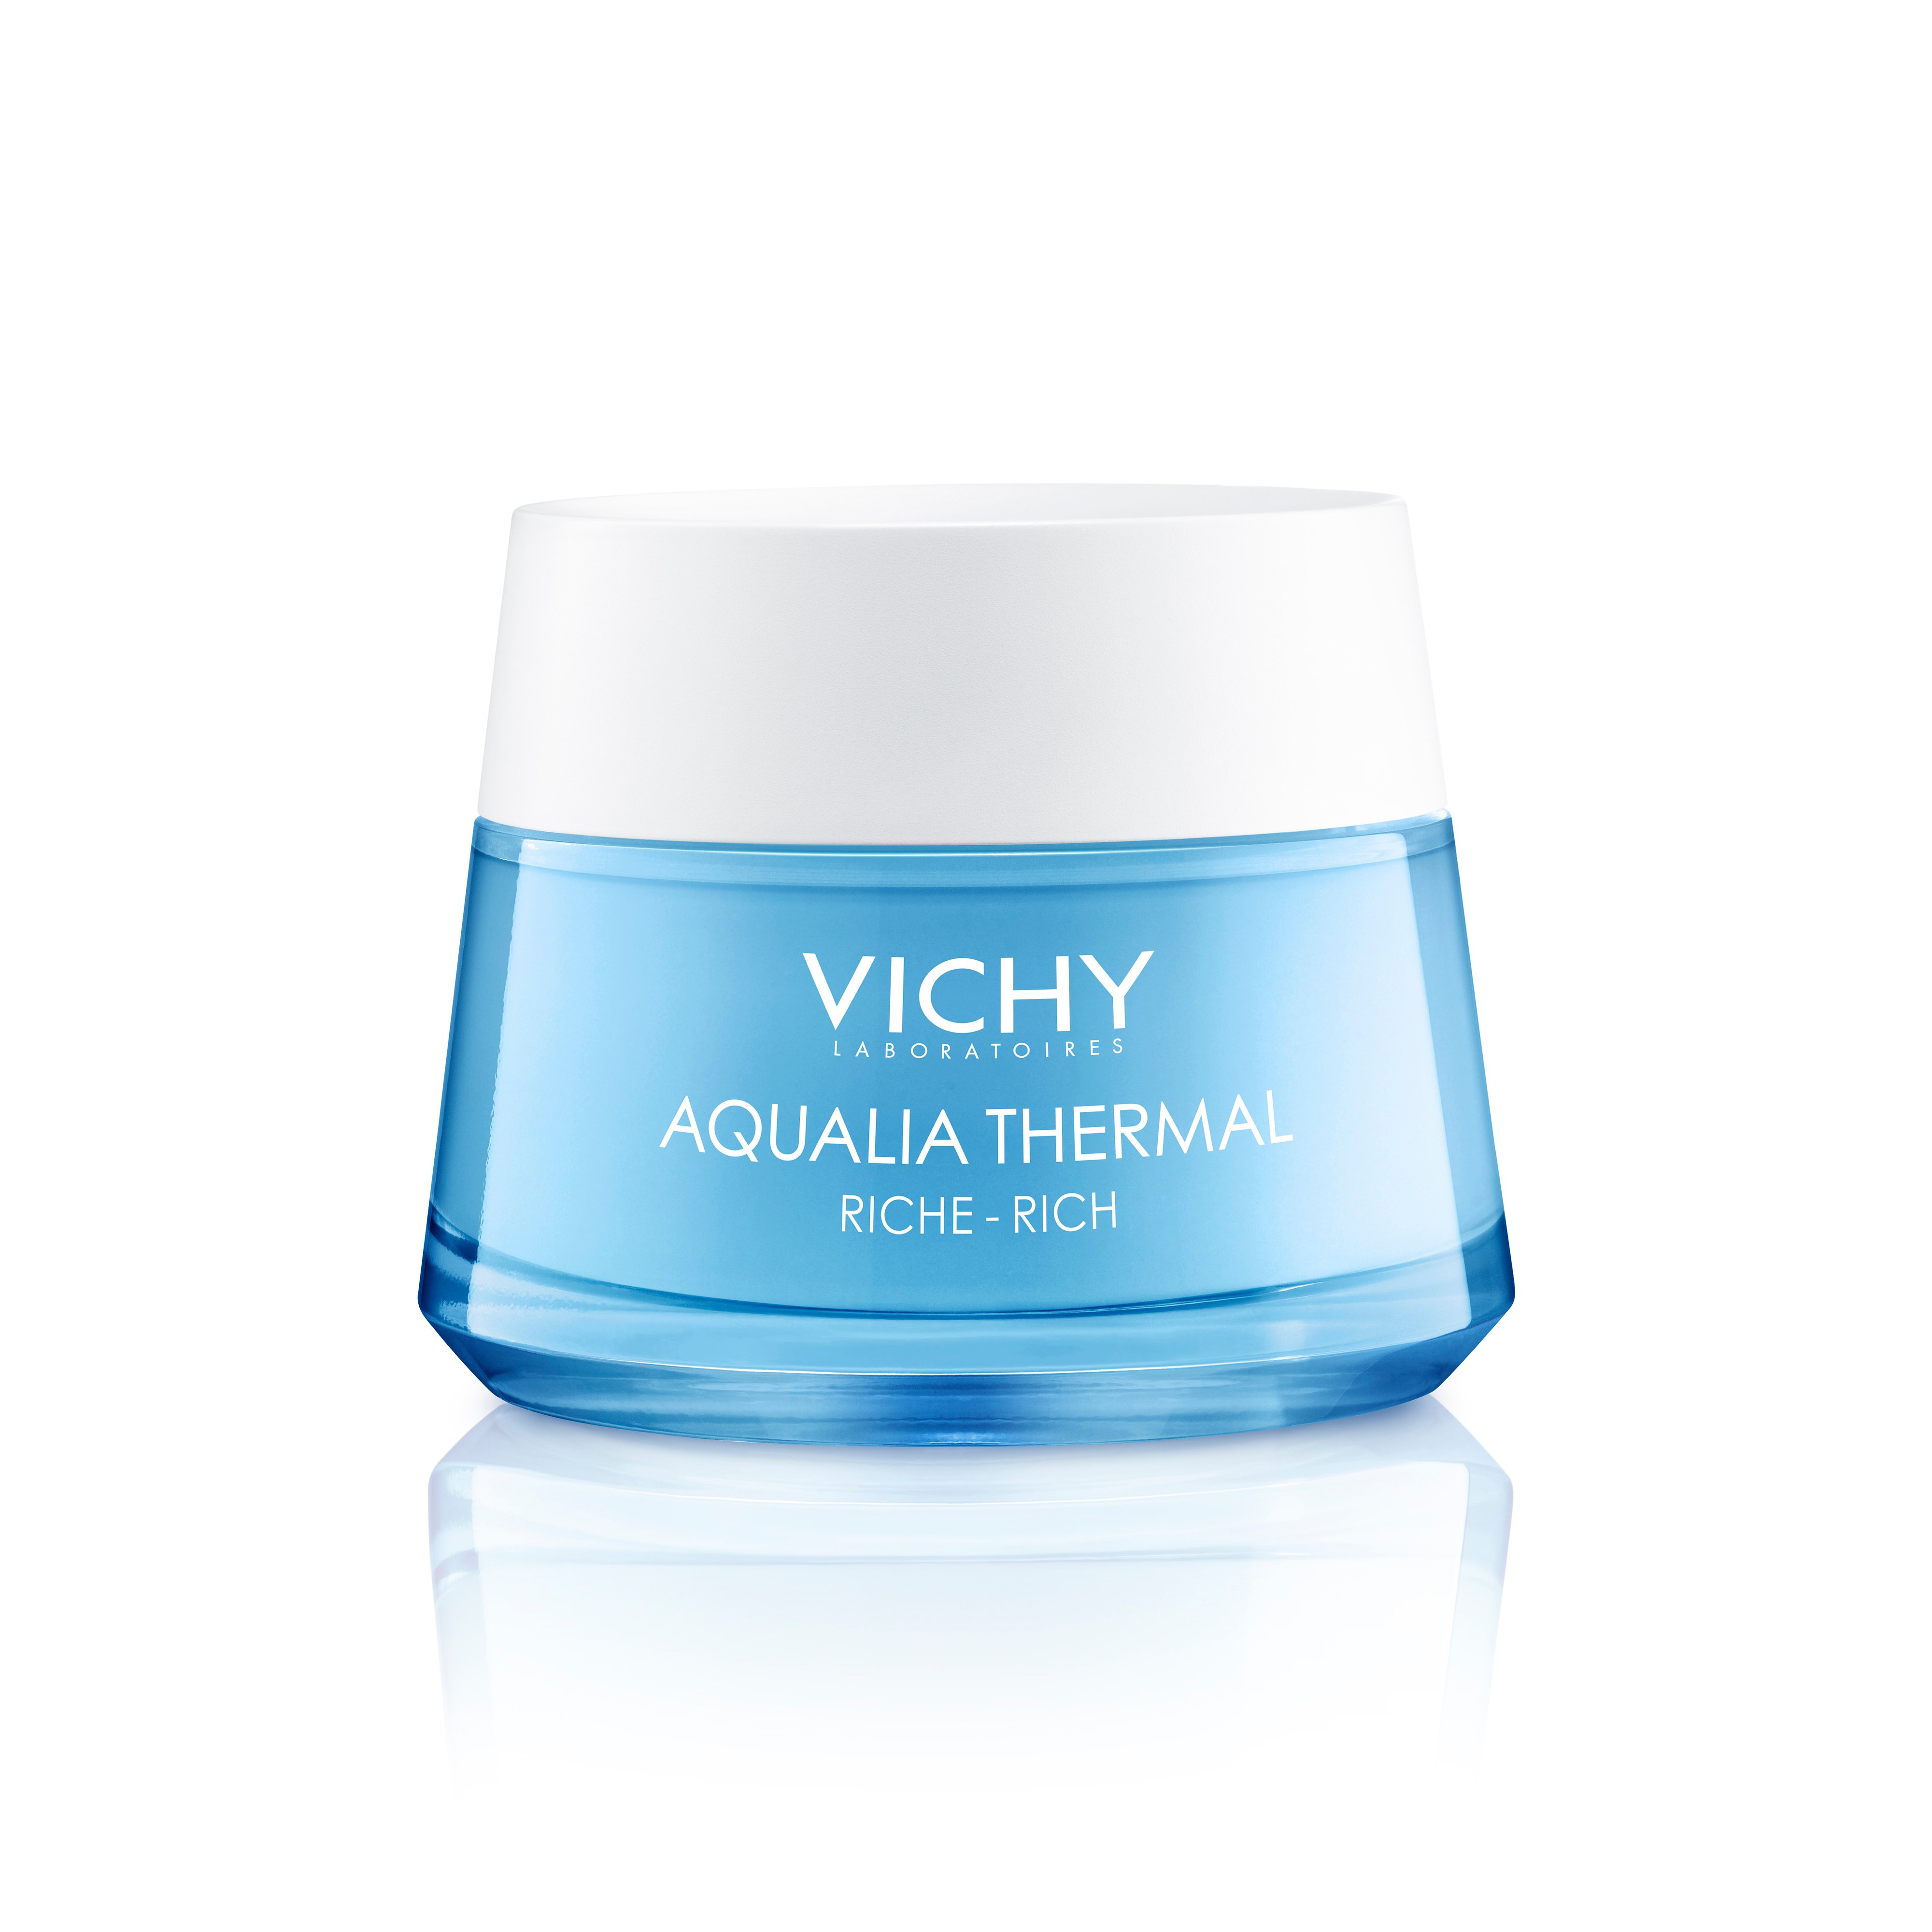 Image of Vichy Aqualia Thermal Rehydraterende Crème - Rijk - 50ml 